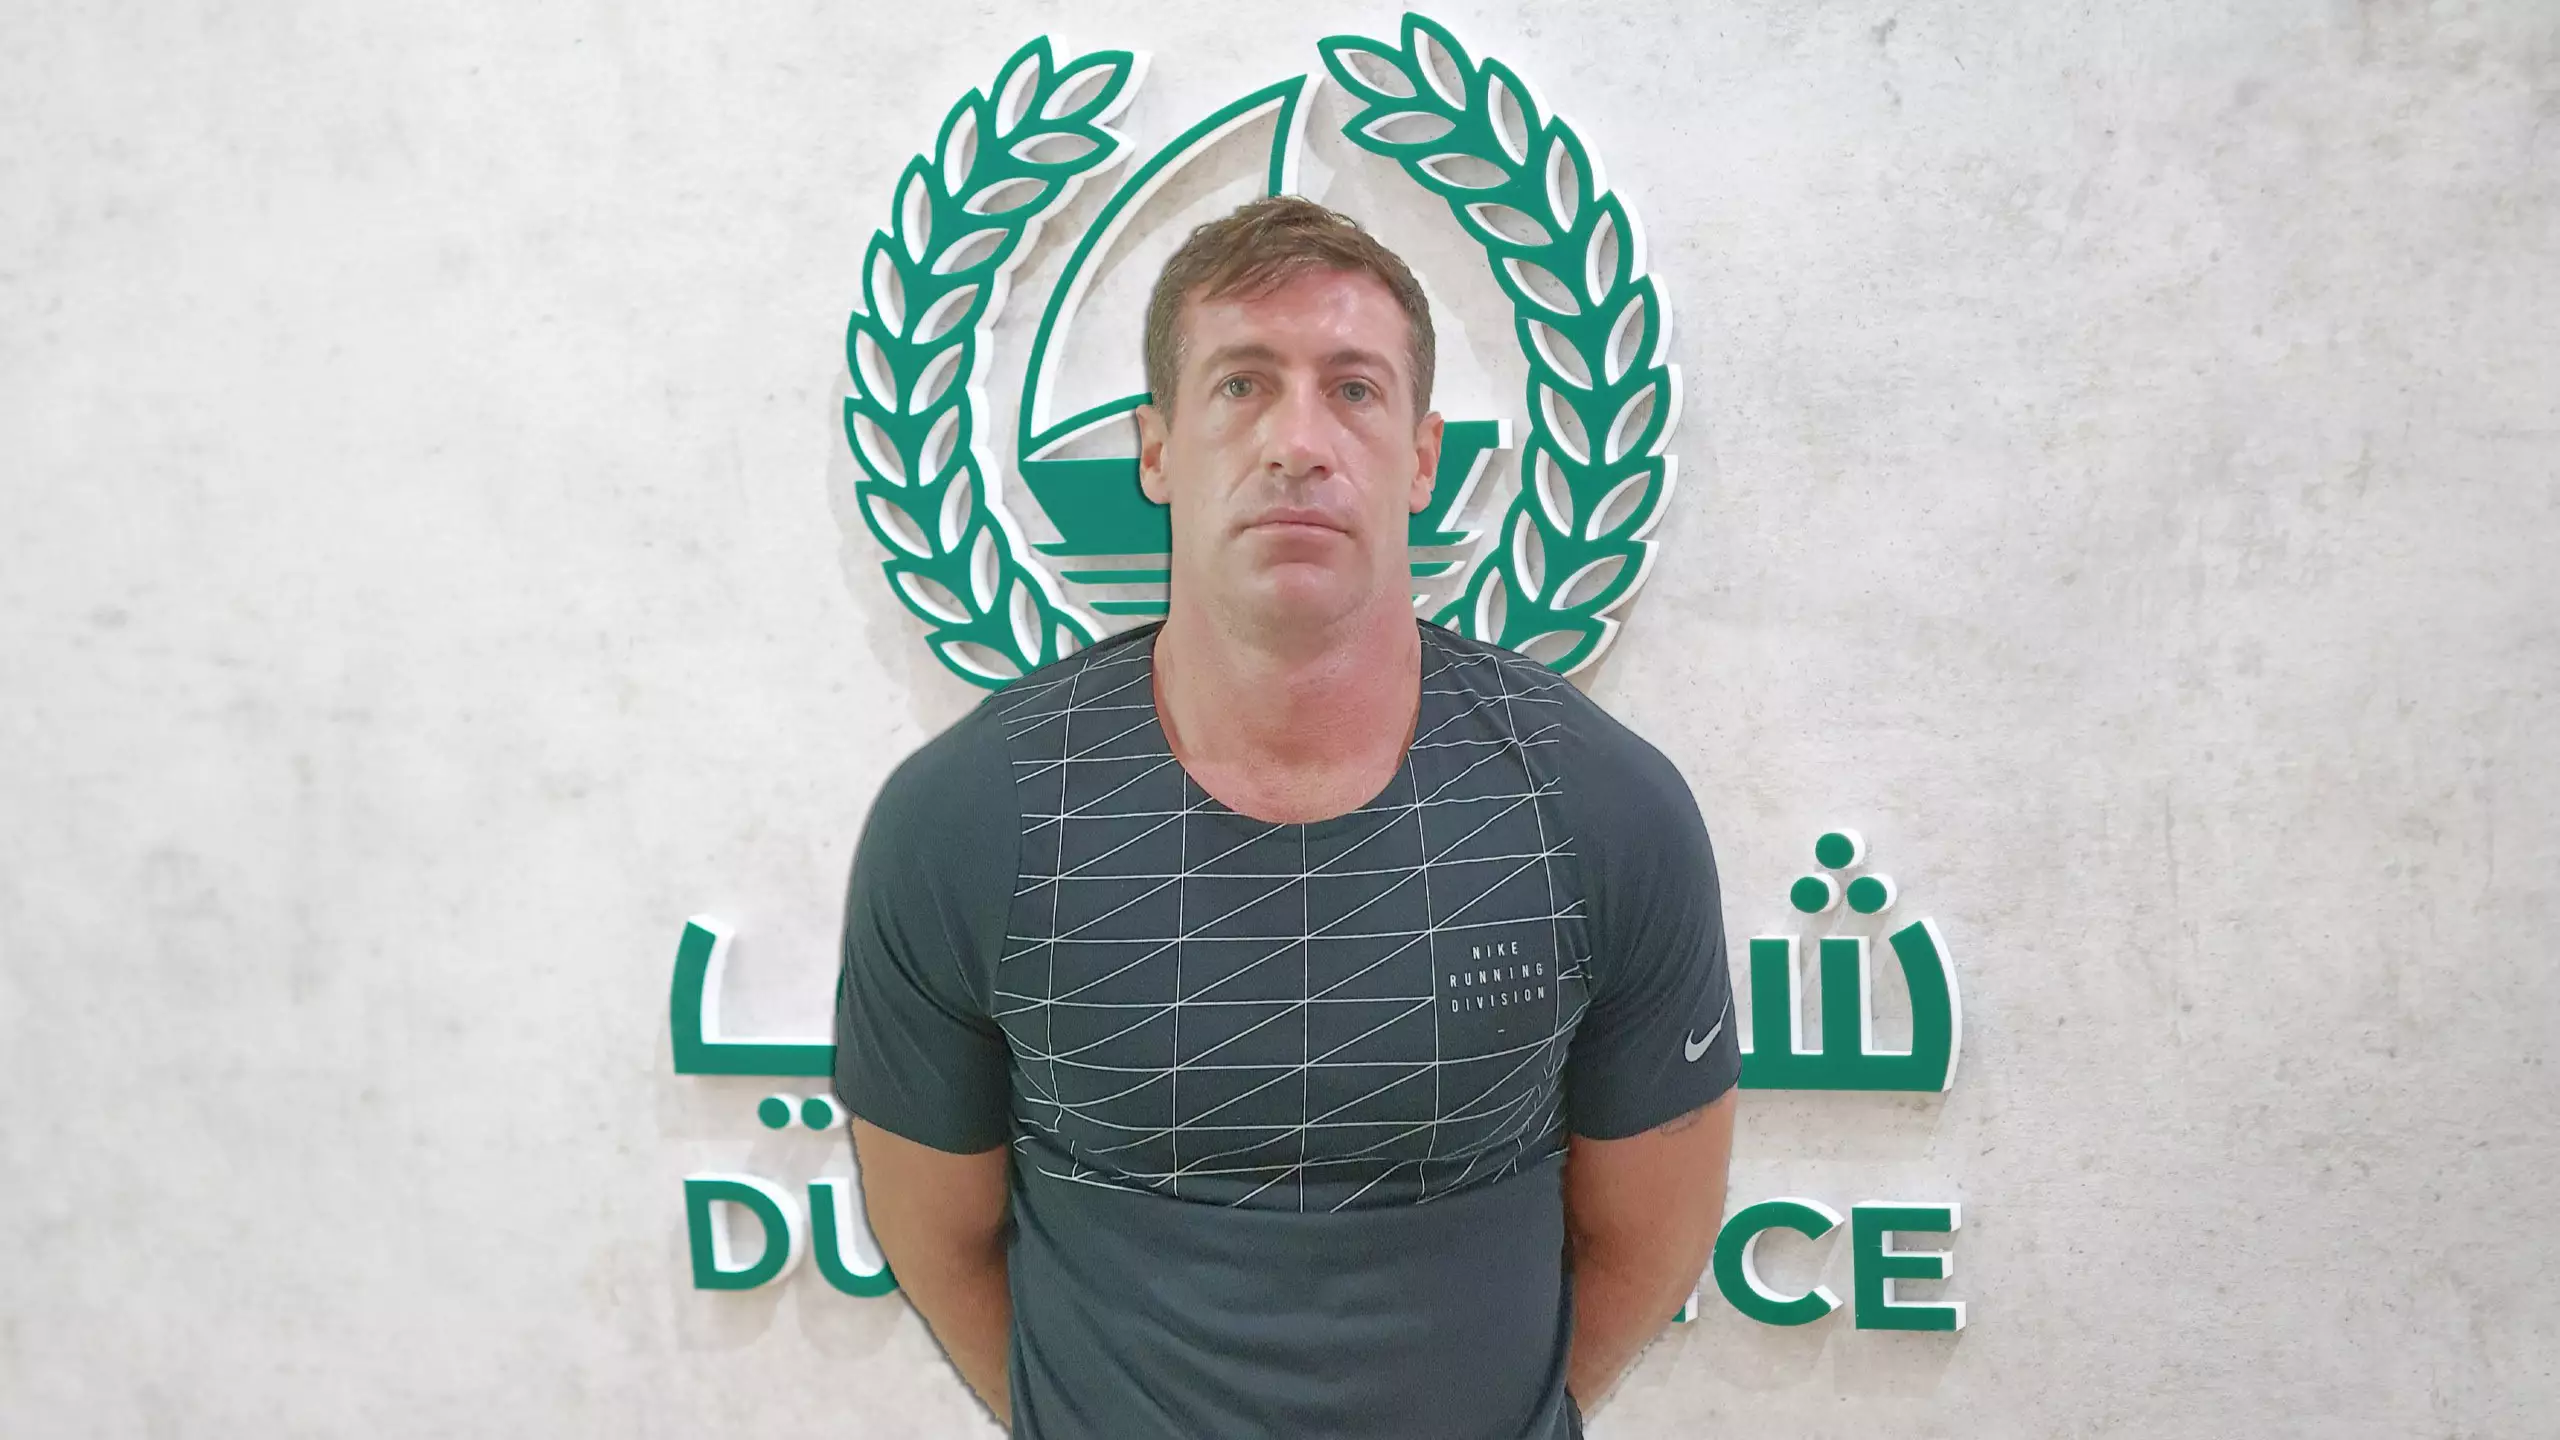 One Of Britain’s Most Wanted Men Arrested In Dubai After Eight Years On The Run